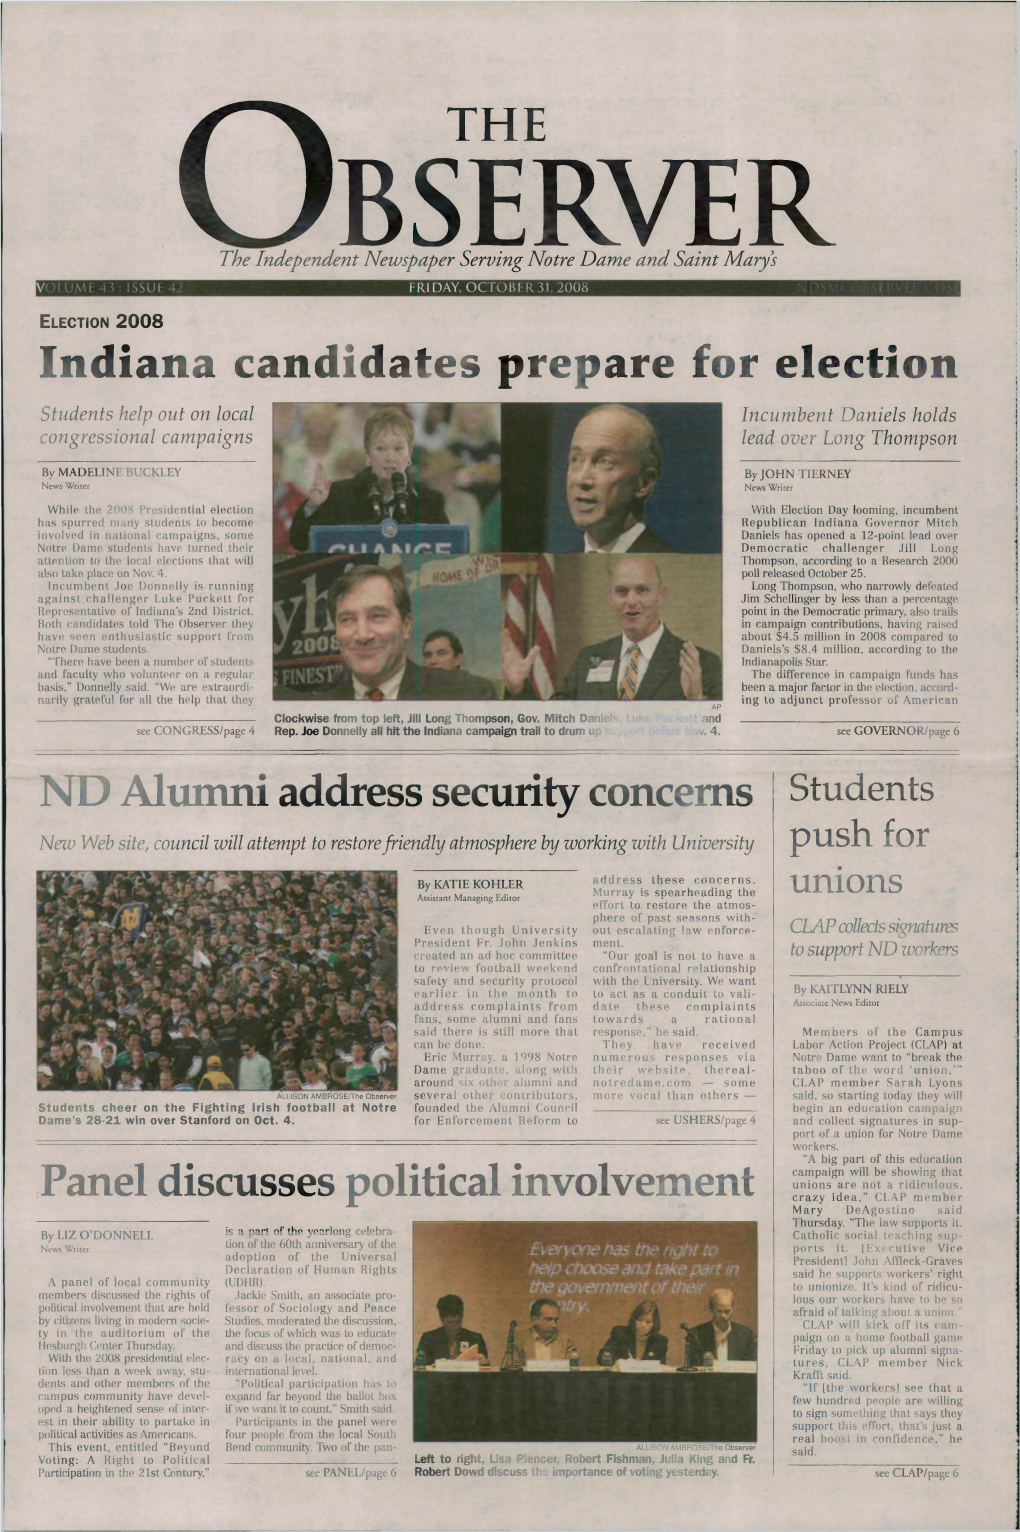 Indiana Candidates Prepare for Election